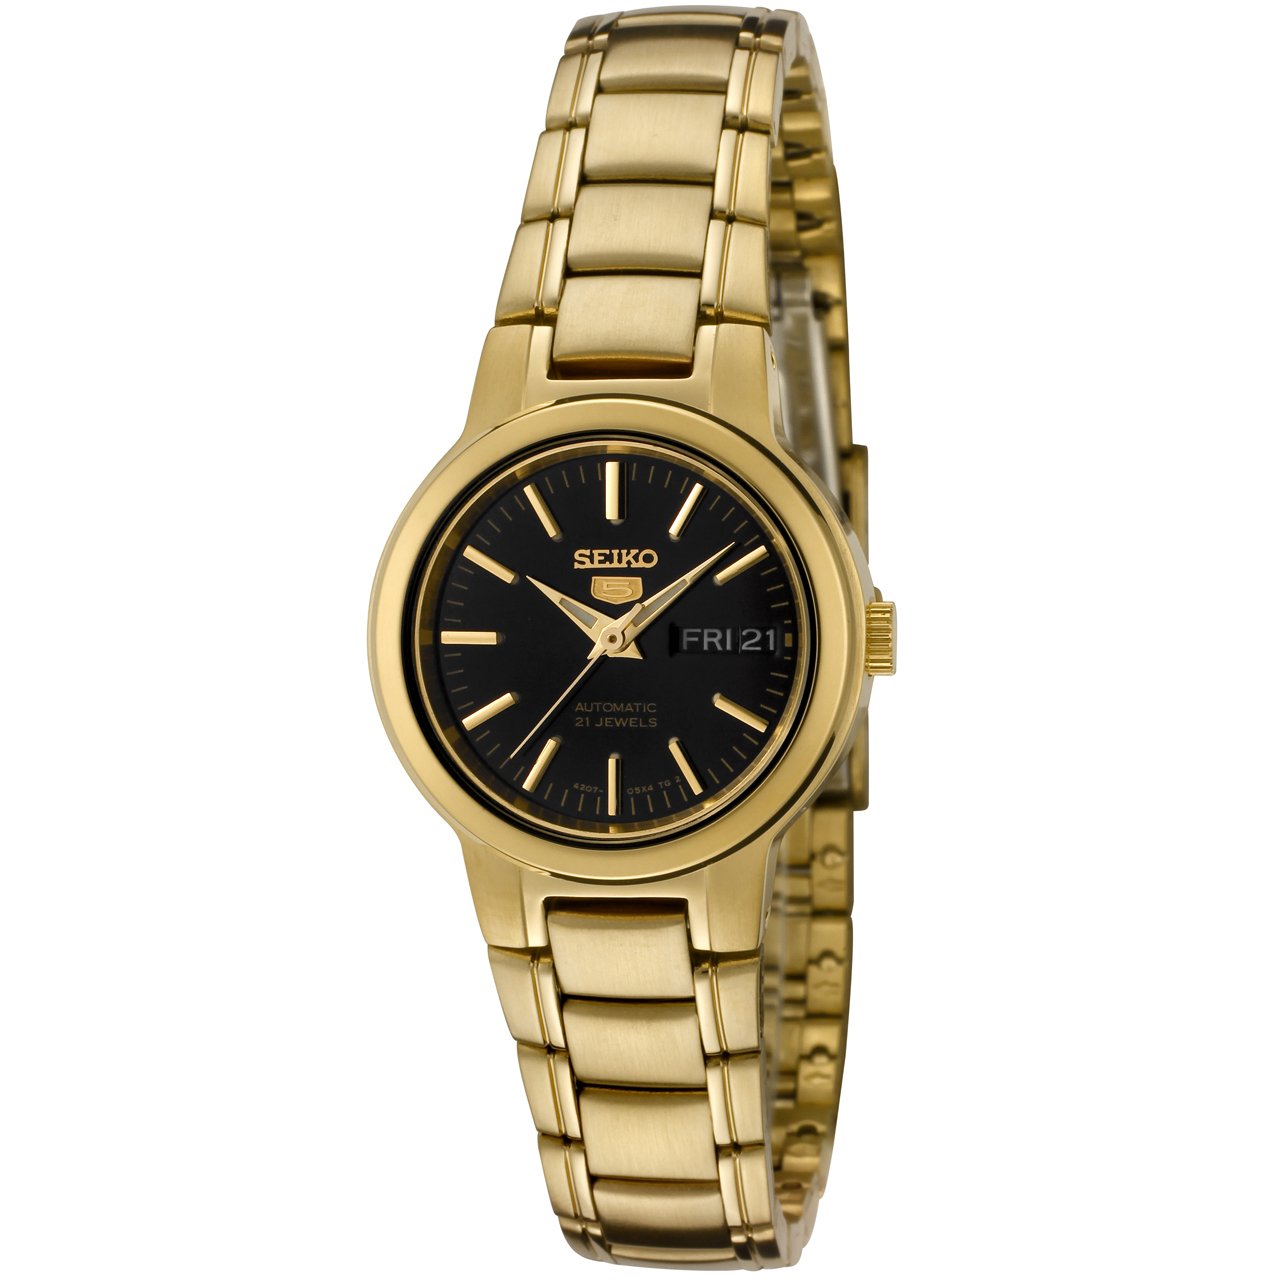 SEIKO Women's SYME48 5 Automatic Black Dial Gold-Tone Stainless Steel Watch